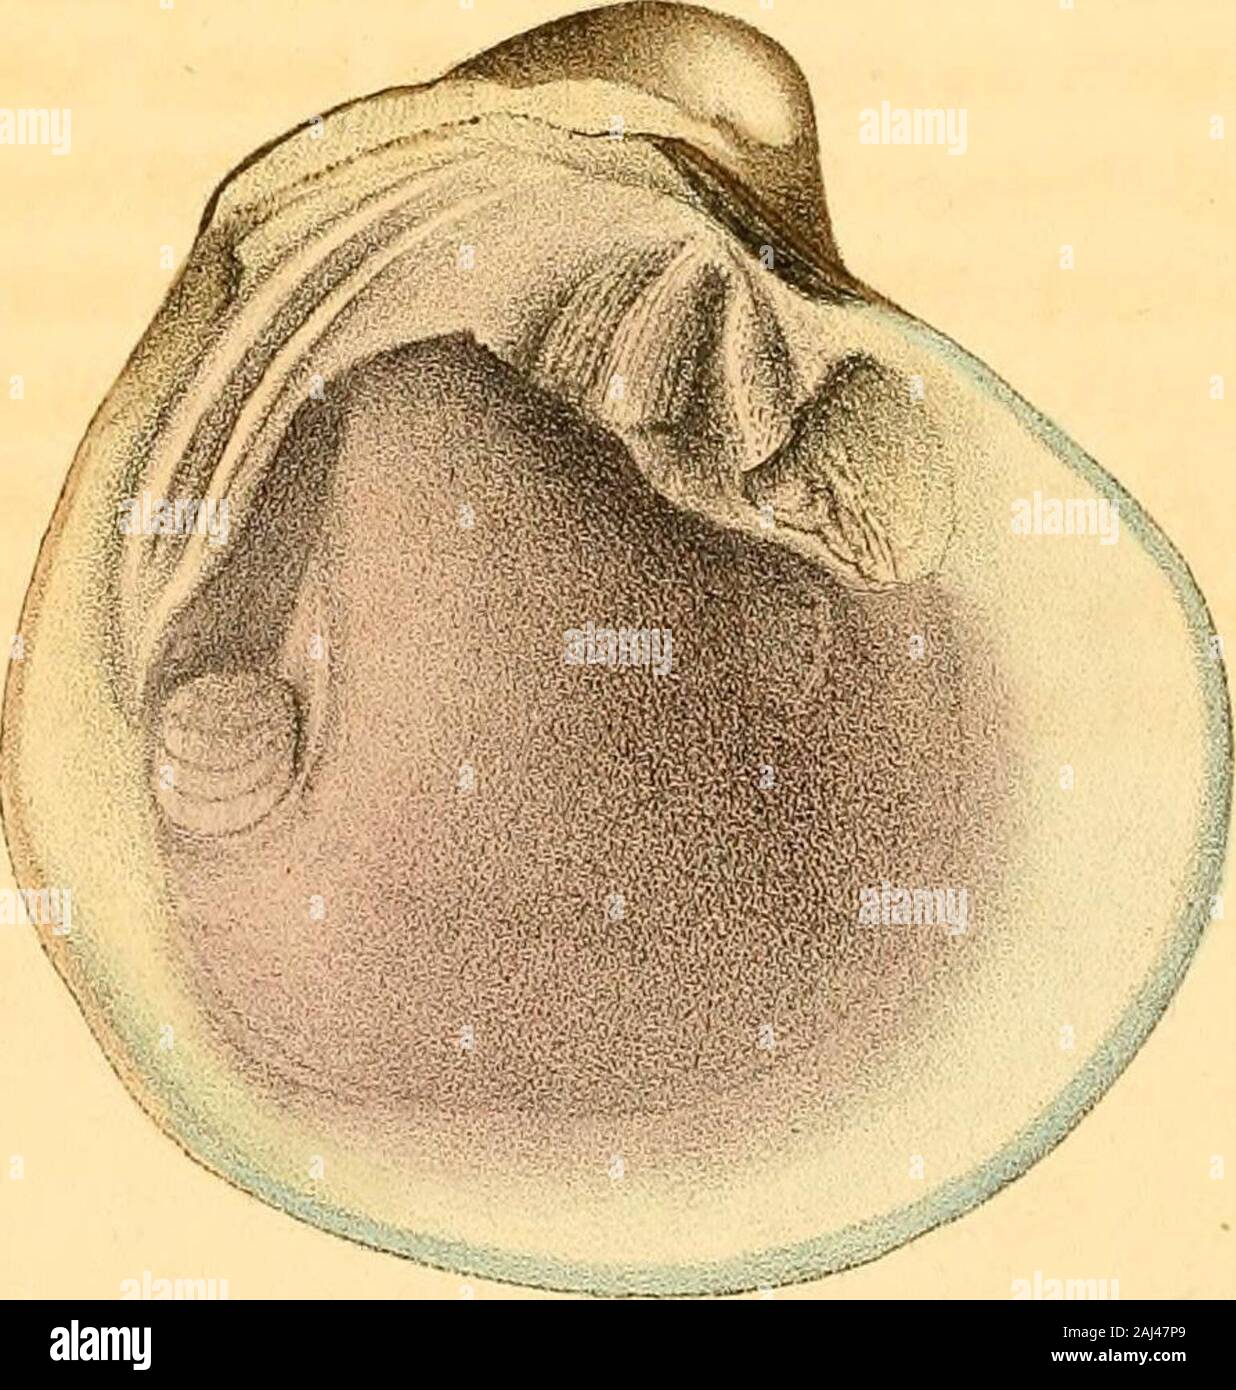 Monography of the family Unionidæ : or, Naiades of Lamarck (fresh water bivalve shells) of North America ... . Unto pffCusit^, Lam 19UNIO RETUSUS. Plate VIII.DESCRIPTION. Shell transversely ovate, ventricose, with concen-tric furrows; umbo very prominent, curved forwards;beaks retuse, medial; ligament long and prominent;umbonial slope rounded, undefined; anterior and basalmargins regularly rounded; posterior side with aslight furrow, and emarginate at the extremity; liga-ment slope arcuate, very oblique; within dark purple,margined with white. SYNONYMES. U. retusa, Lam. An. sans vert. vol. vi. Stock Photo